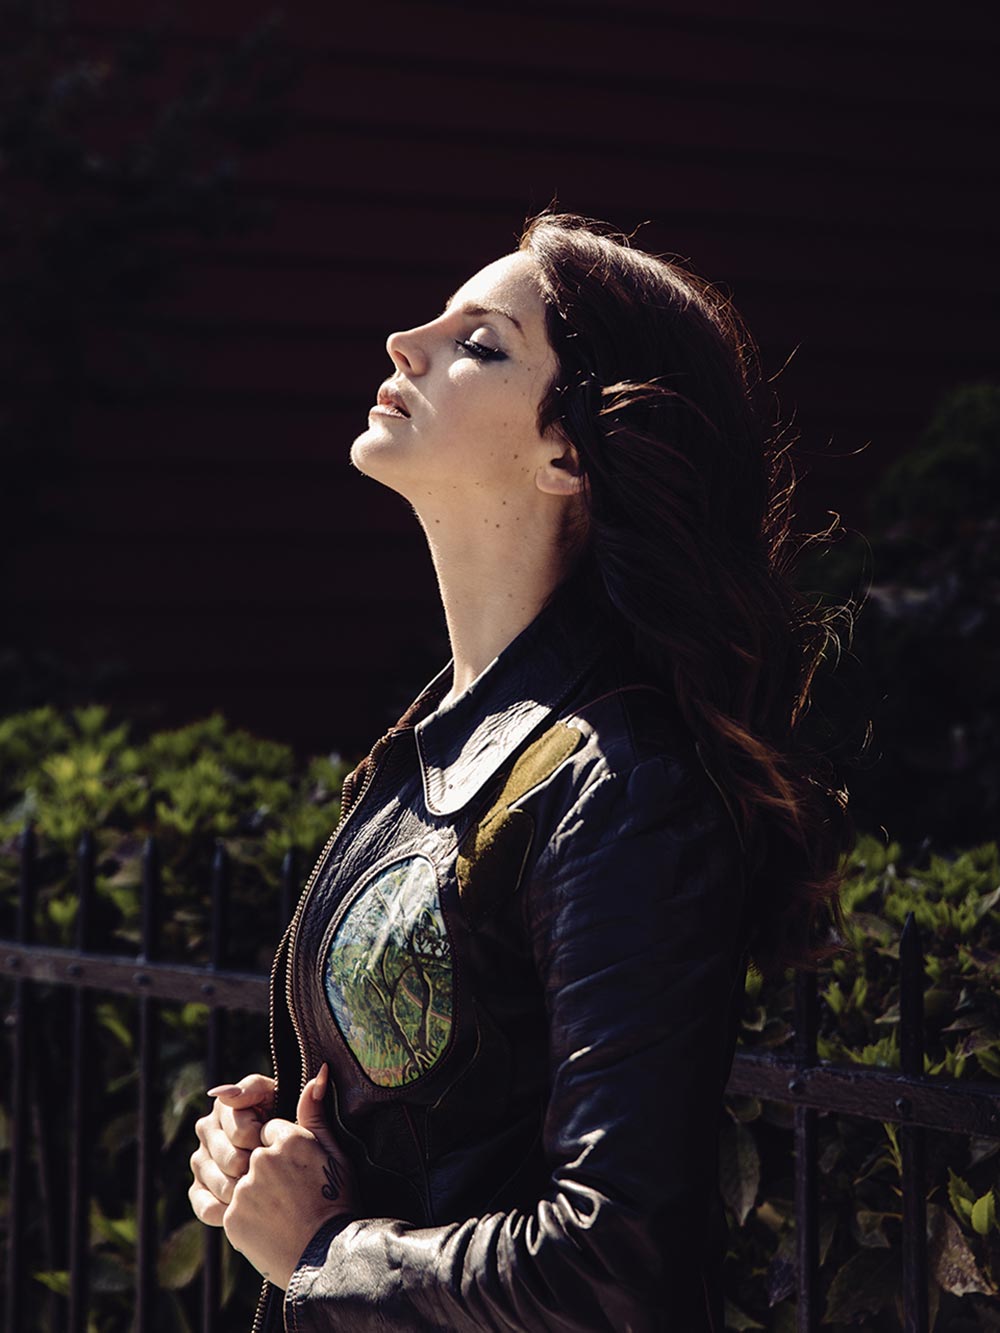 Lana Del Rey 'Is Anyone She Wants to Be' Photoshoot for